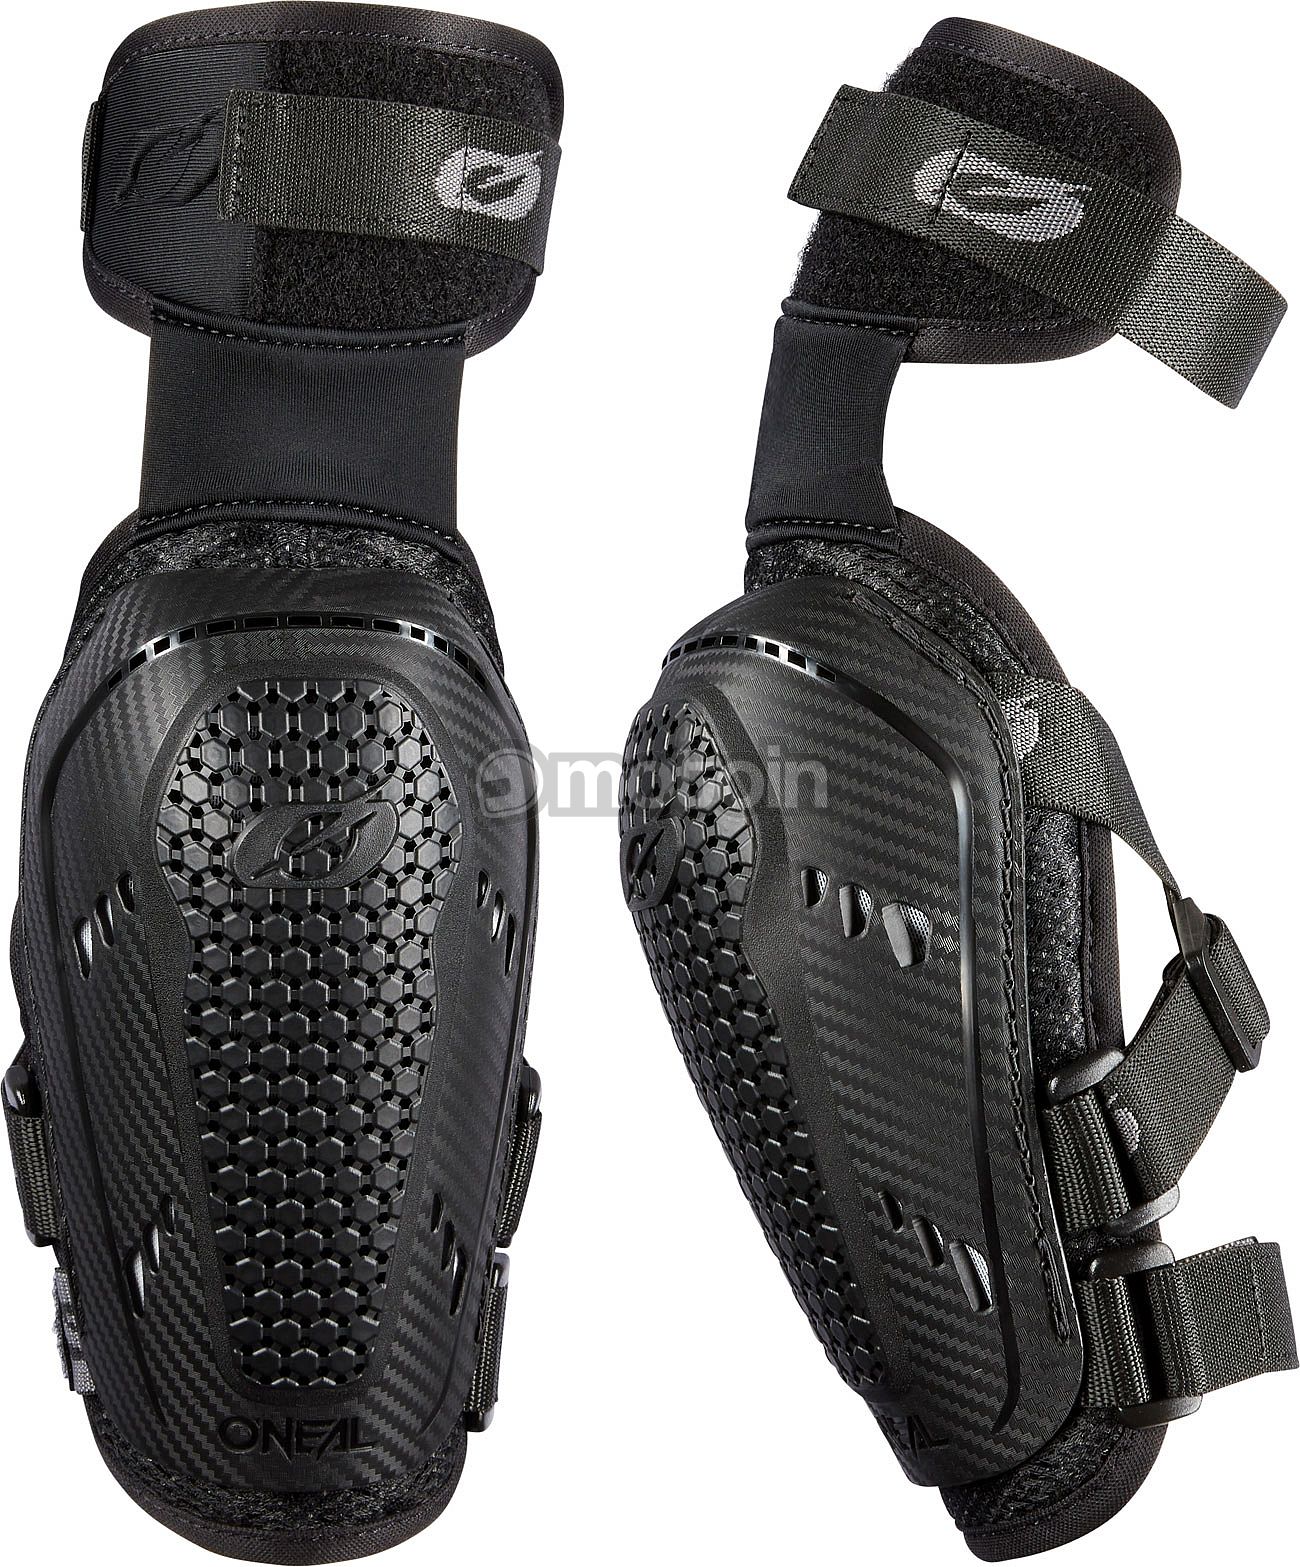 ONeal Pro III S23, elbow-protectors Level-1 youth